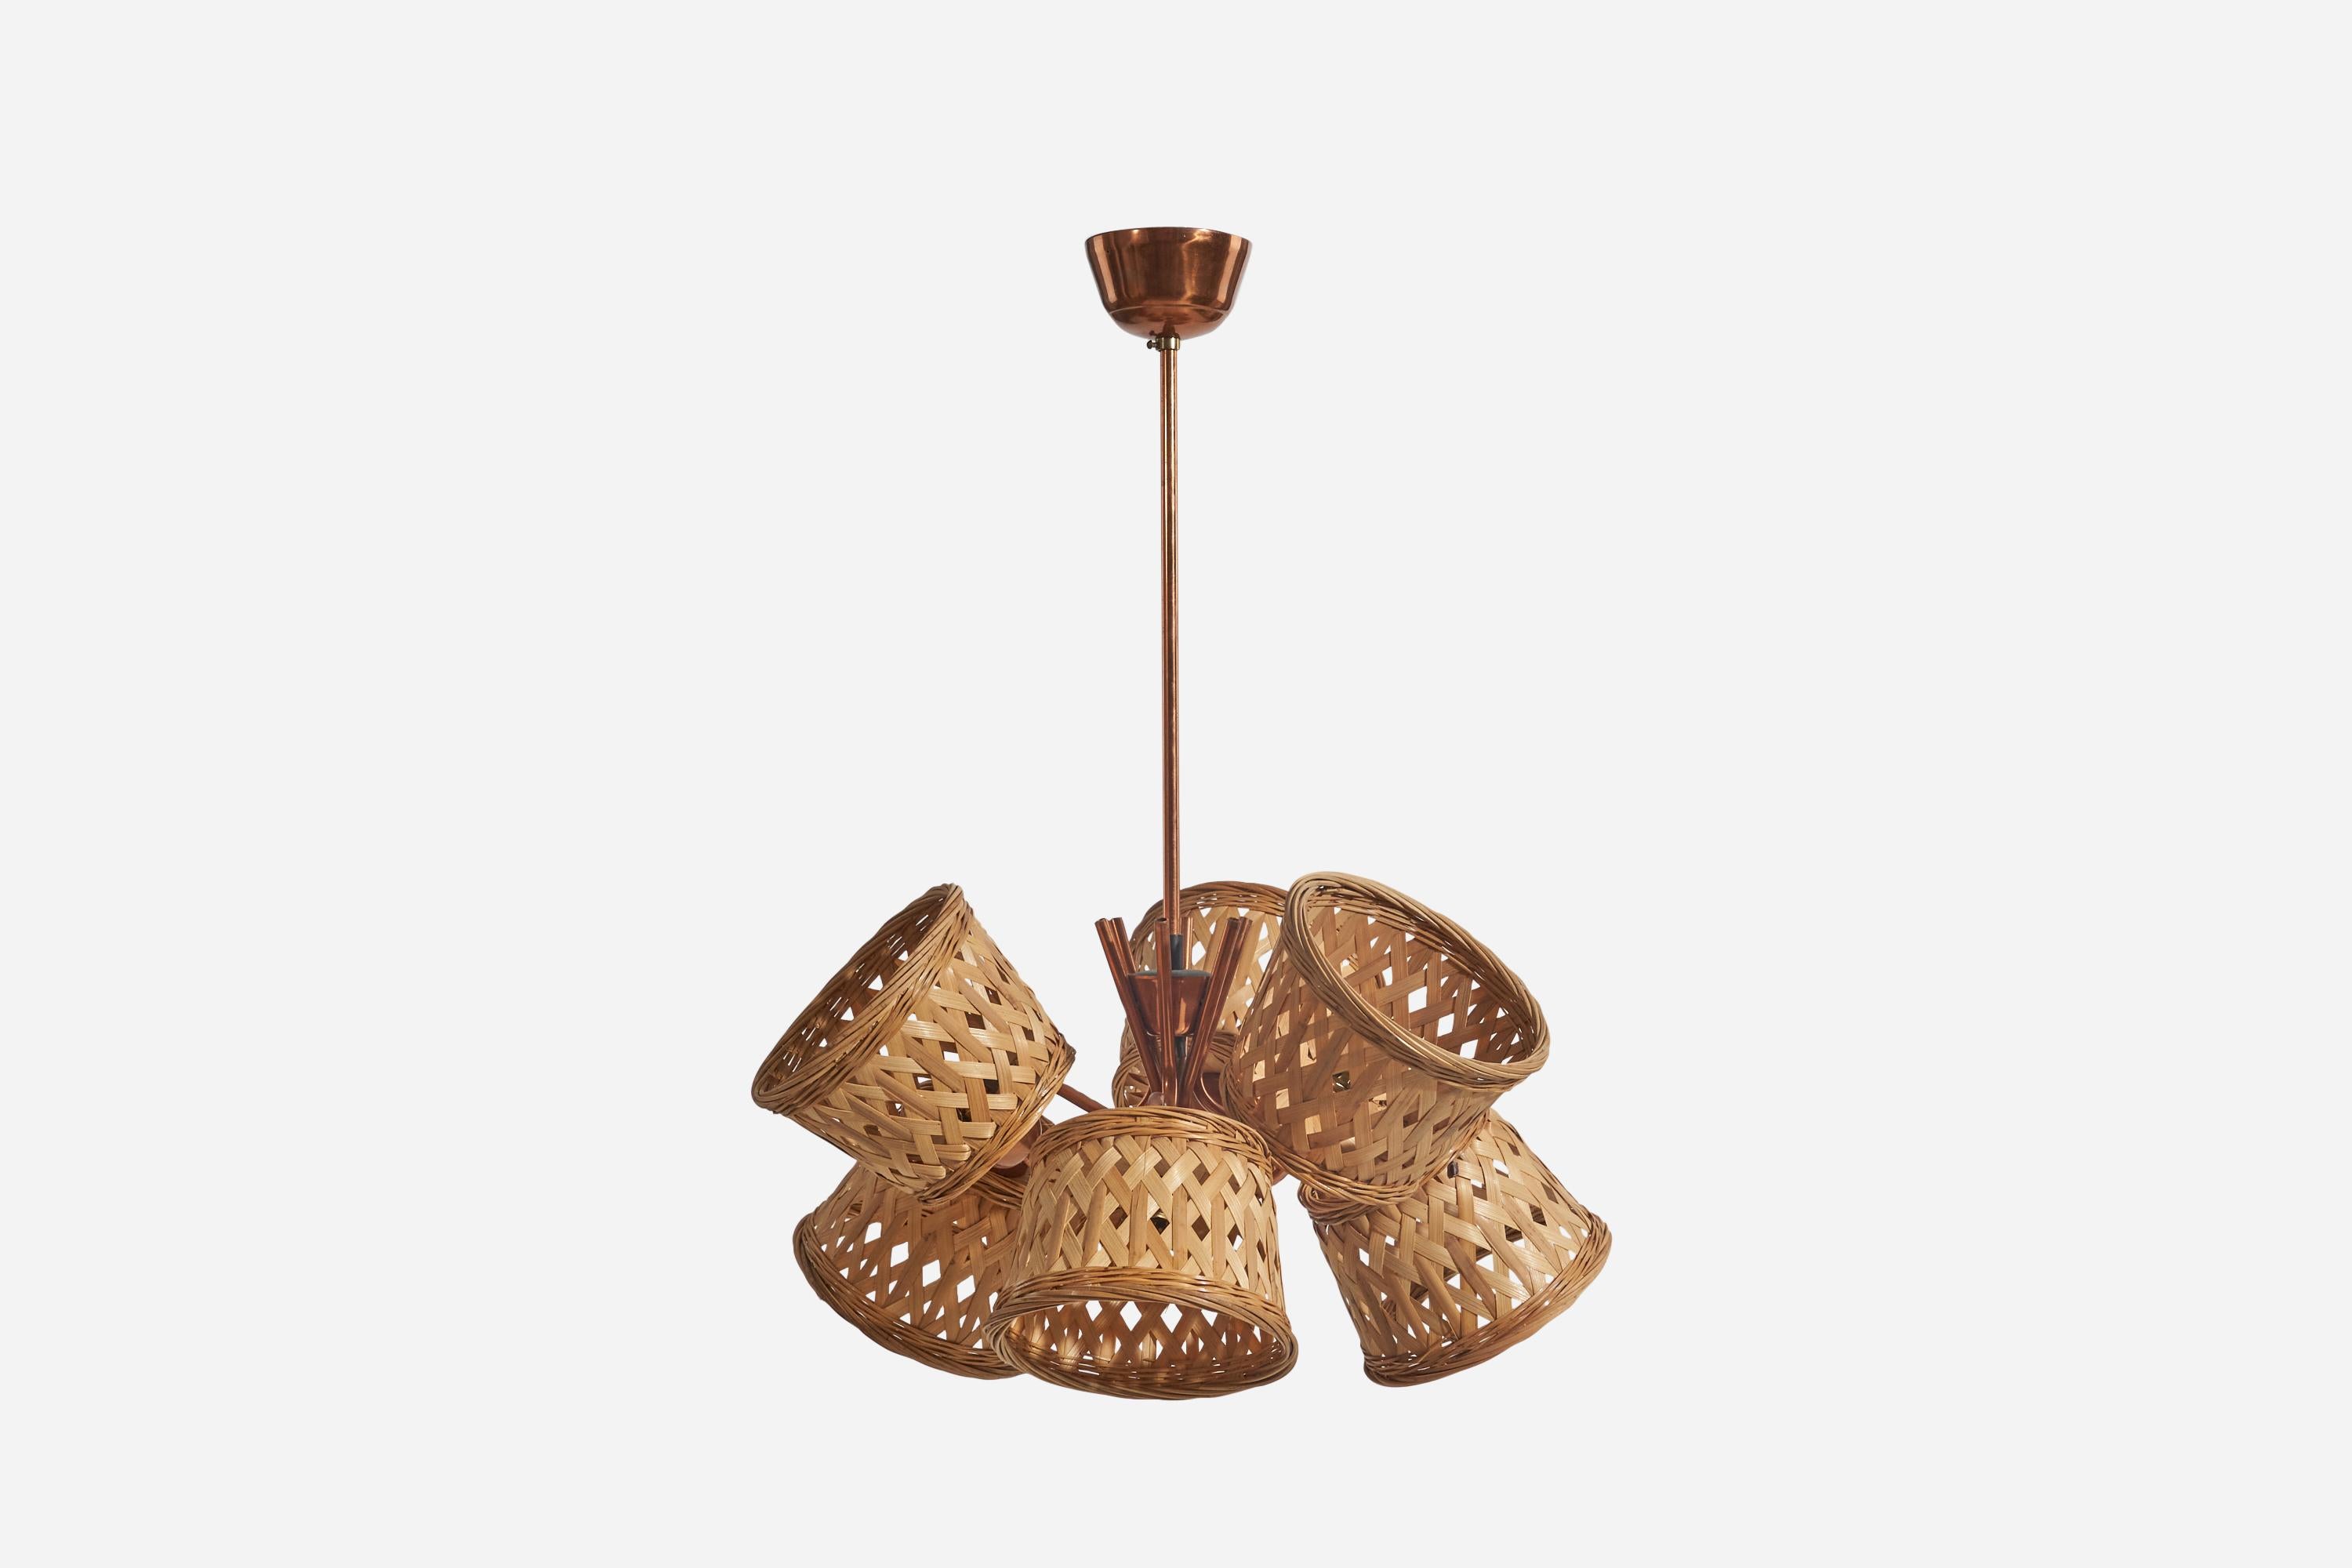 A copper and rattan chandelier designed and produced by a Swedish designer, Sweden, 1950s.

